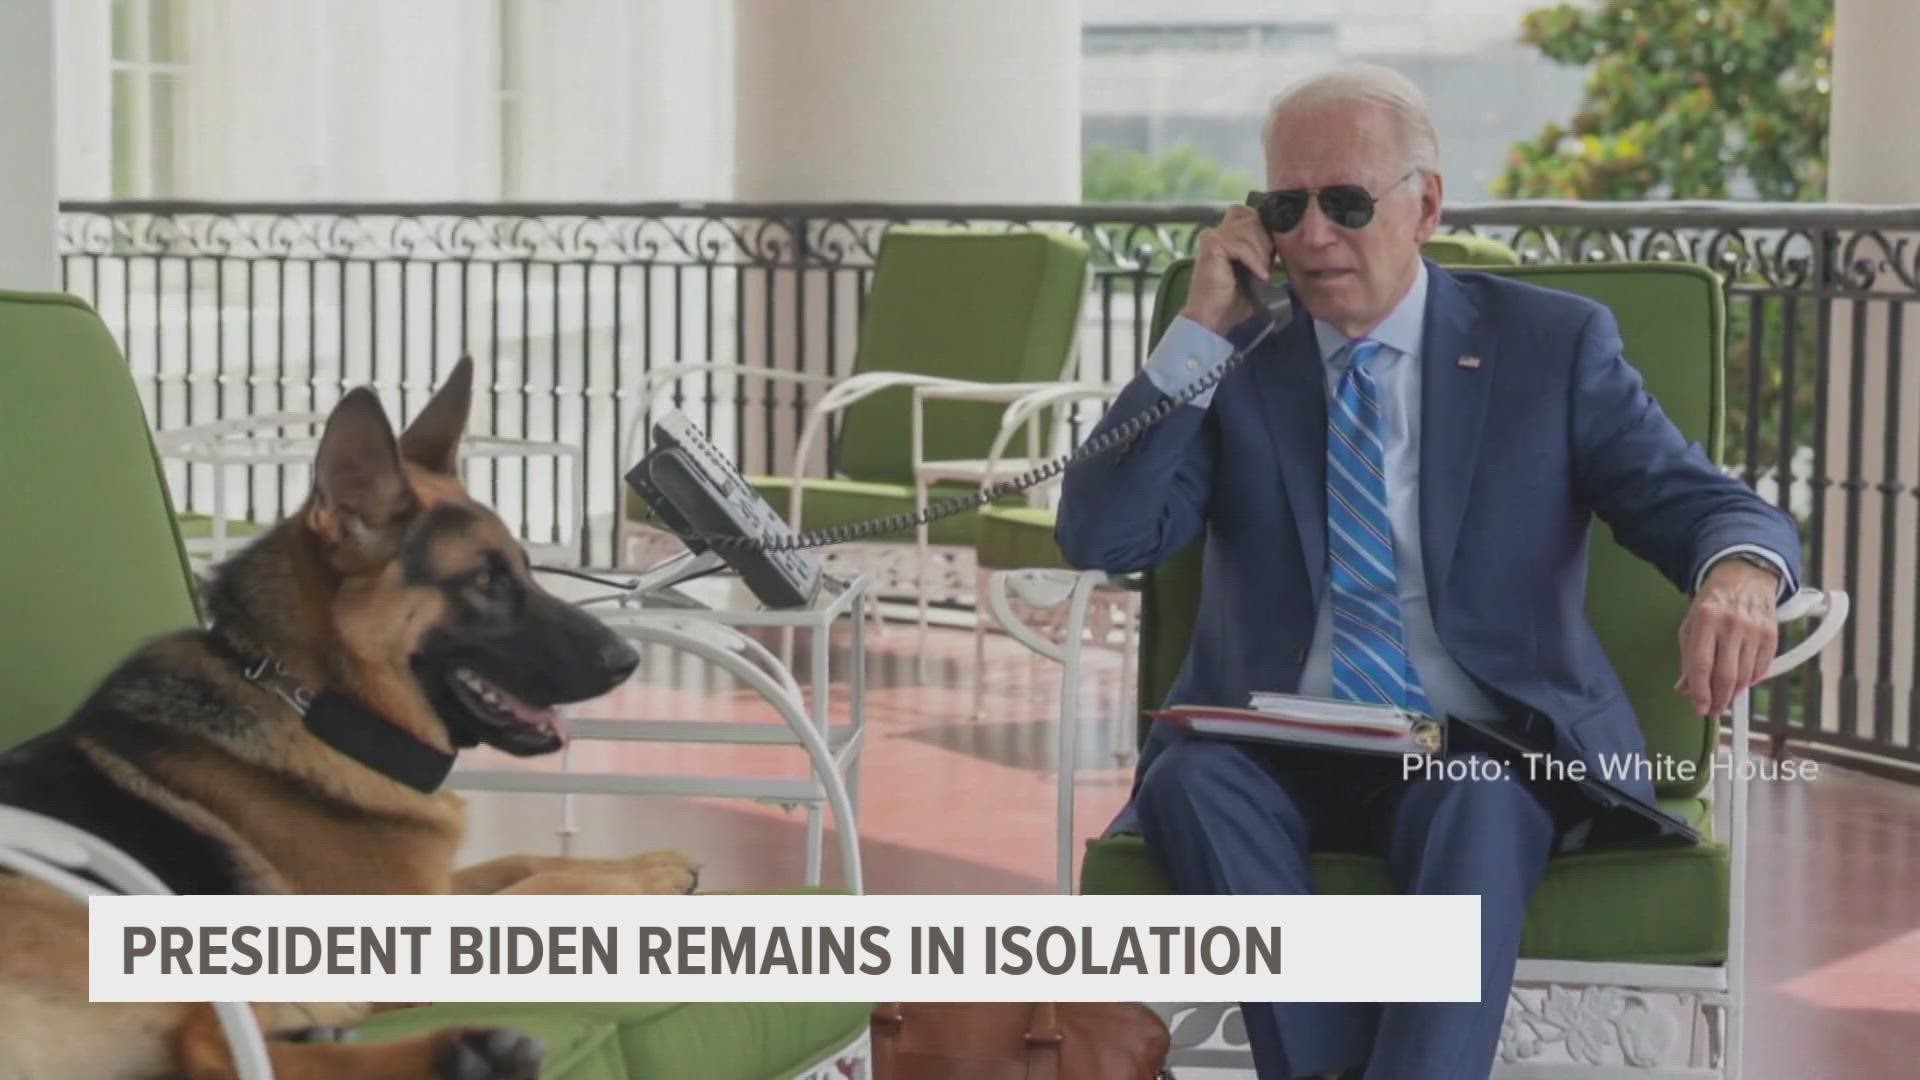 This morning President Biden's COVID-19 symptoms are "almost completely resolved" after testing positive for the BA.5 subvariant.